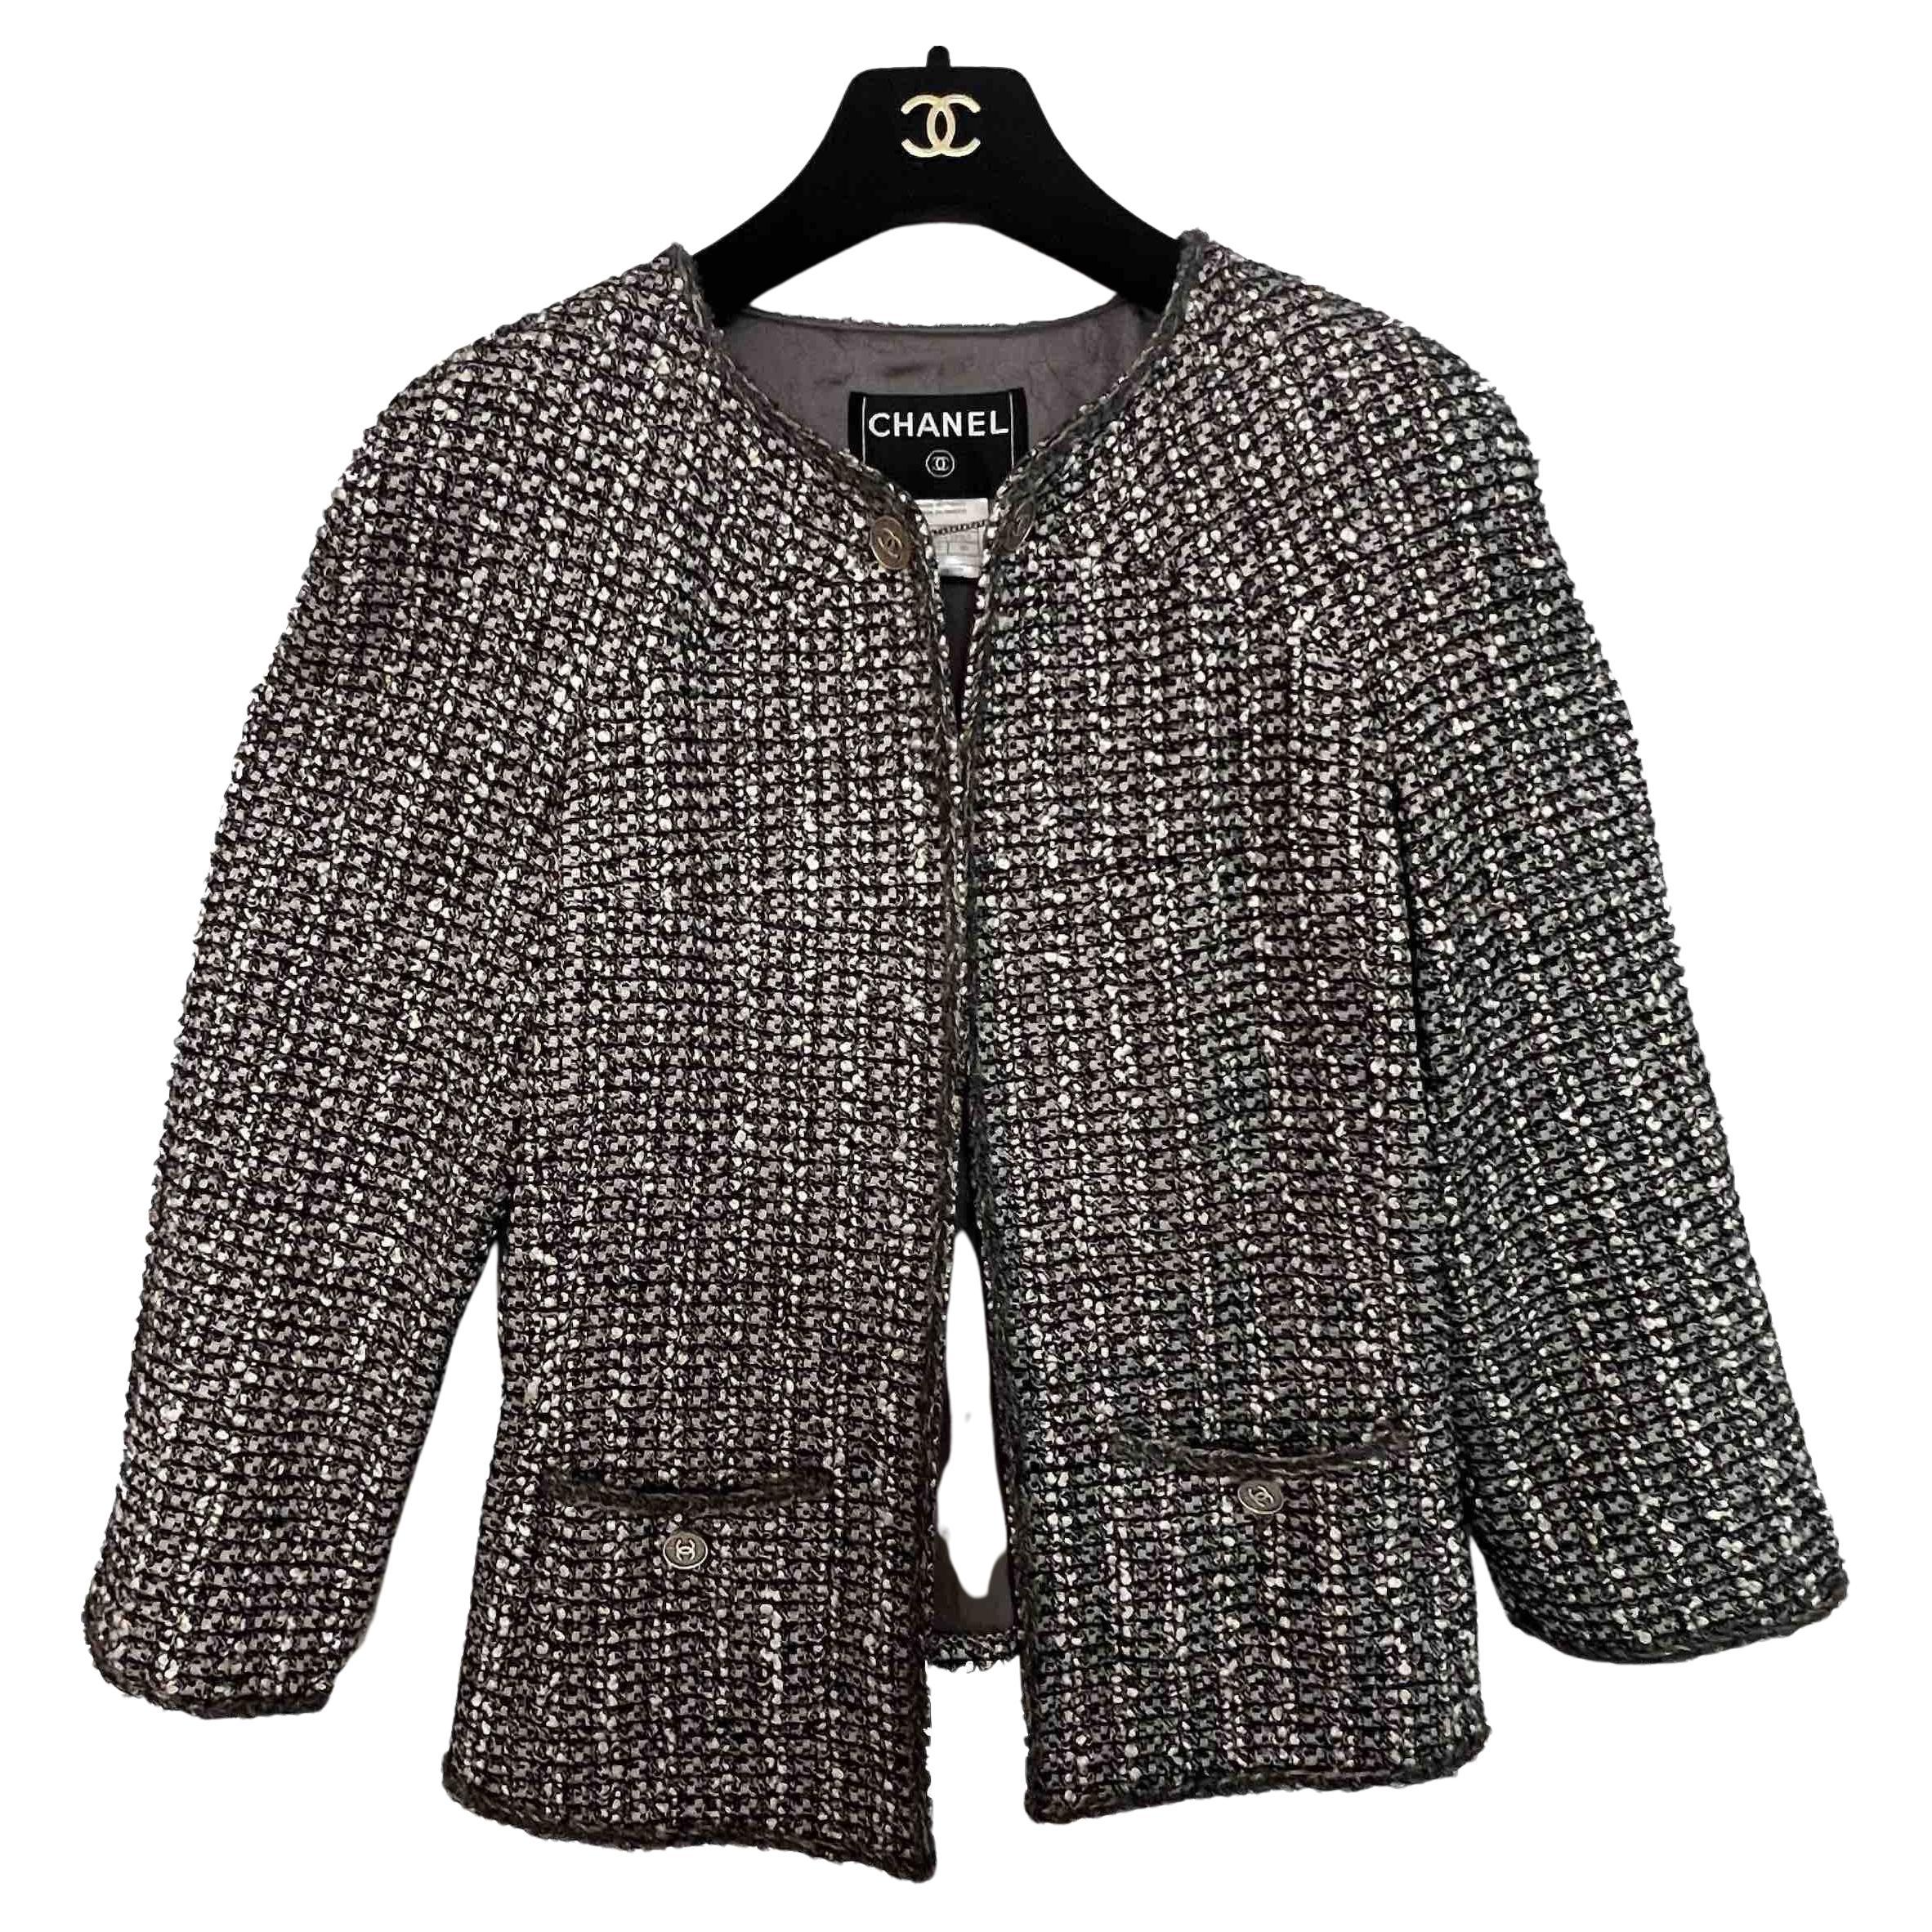 CHANEL jacket in Grey Tweed Size 40fr. Monogram gray silk lining. You will have a chain along the jacket and pockets.
In very good condition
Size: 40fr
Collection Spring 2006.
Dimensions flat: shoulders: 42 cm, under the chest: 48 cm, height: 53 cm,